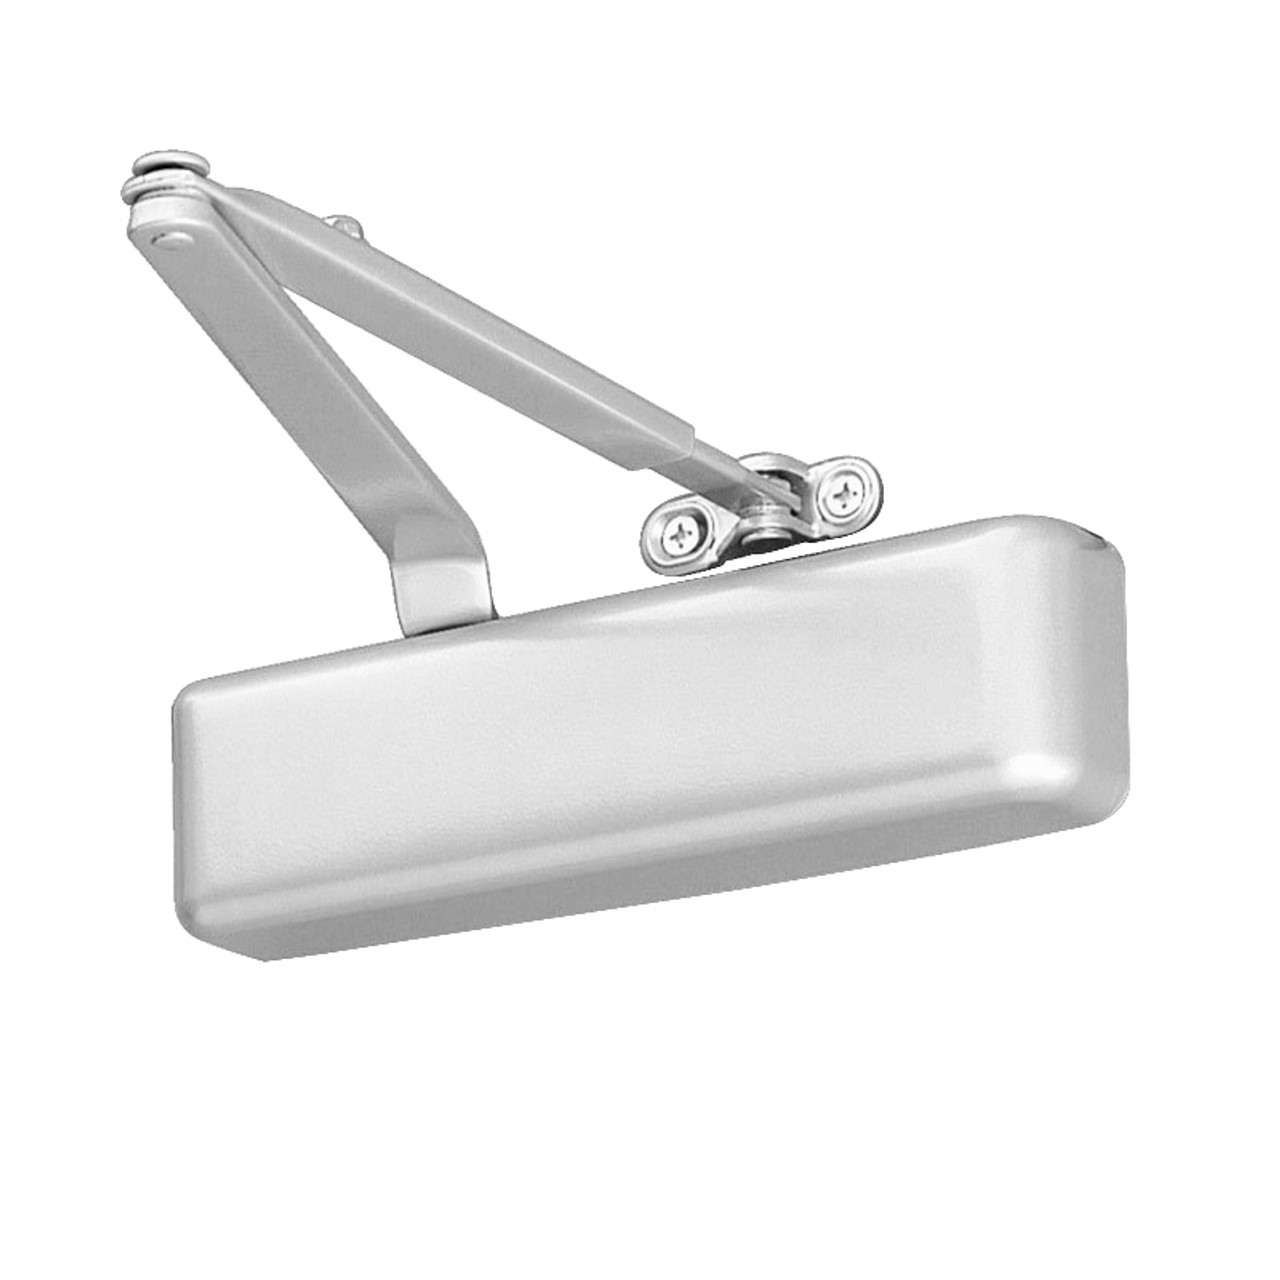 4031-HEDA-RH-US26 LCN Door Closer with Hold Open Extra Duty Arm in Bright Chrome Finish